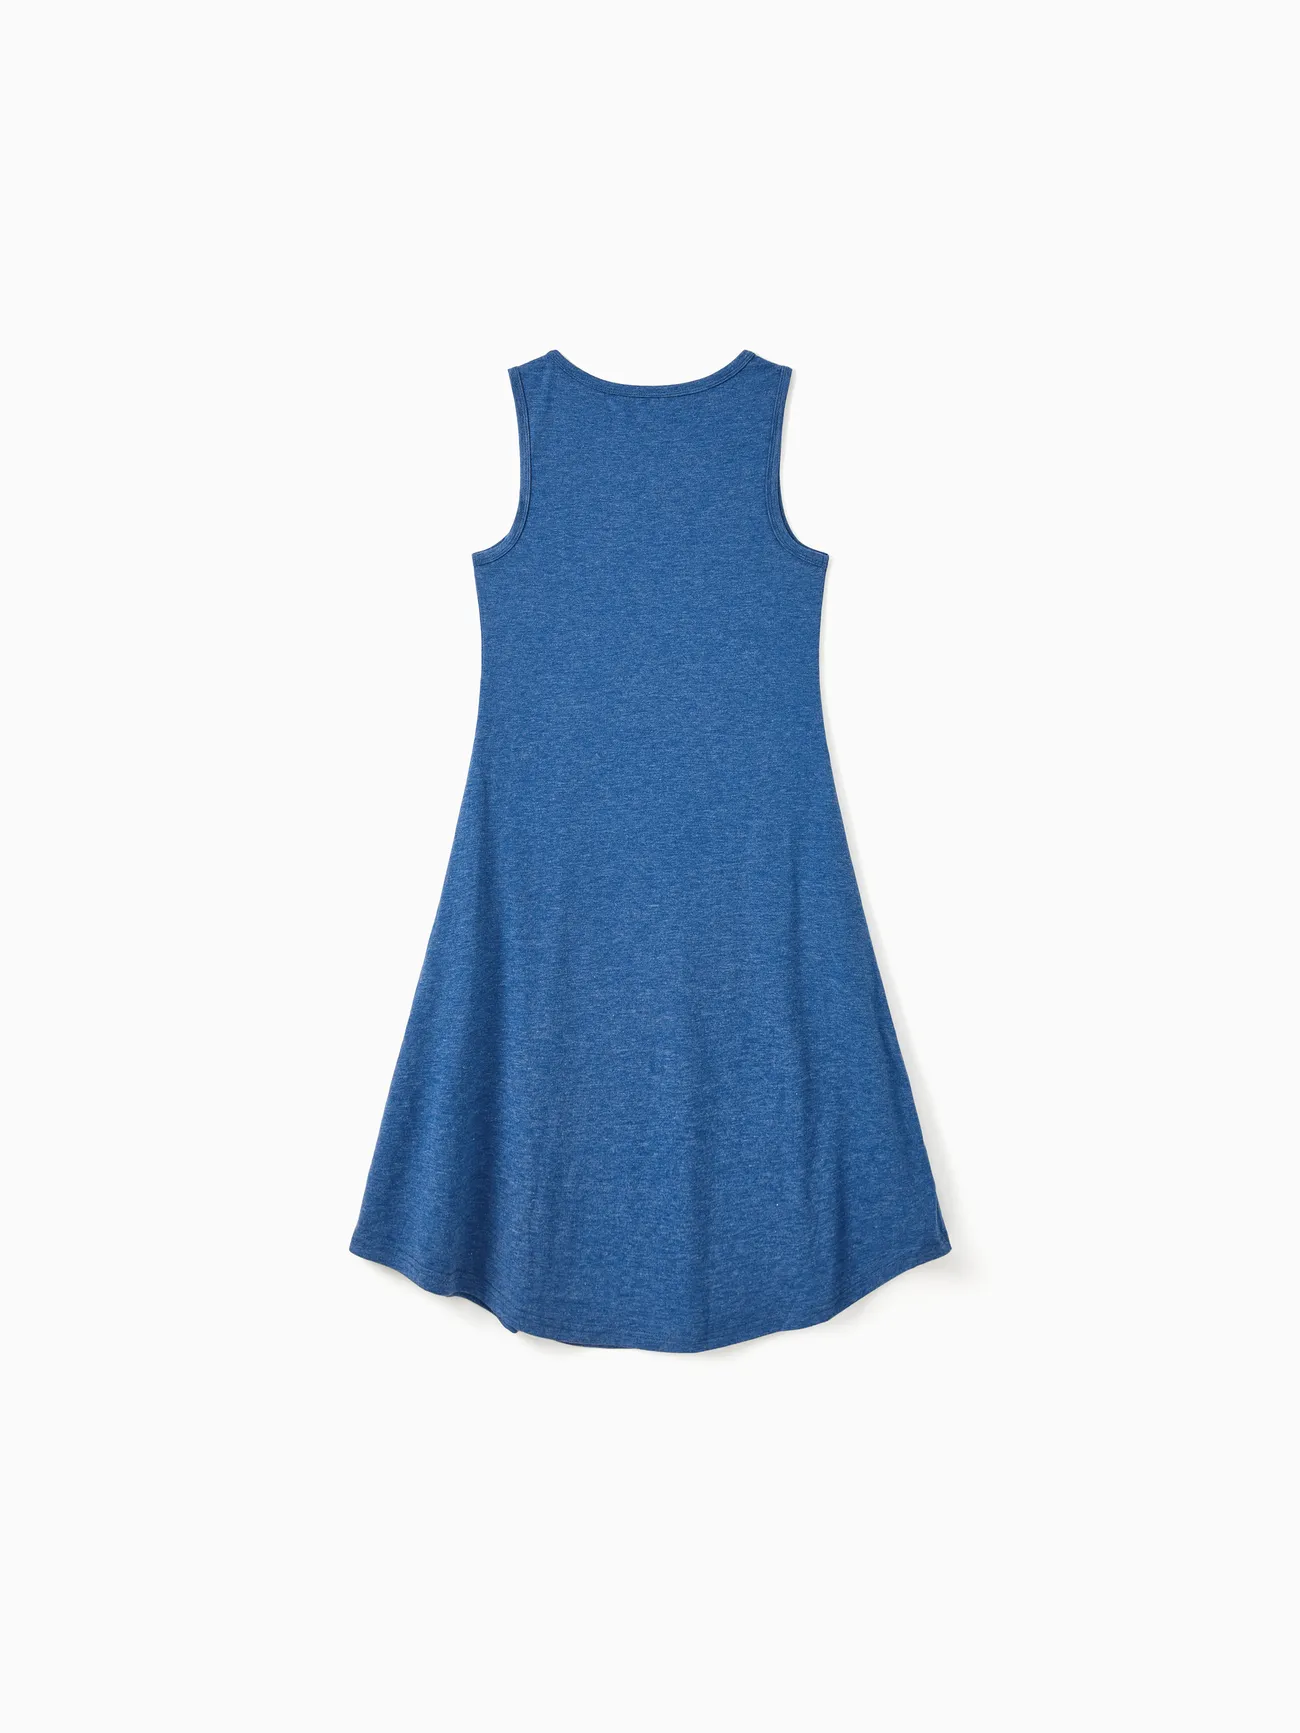 Family Matching Sets Blue Tank Top or Flowy A-Line Tank Dress with Pockets Blue big image 1